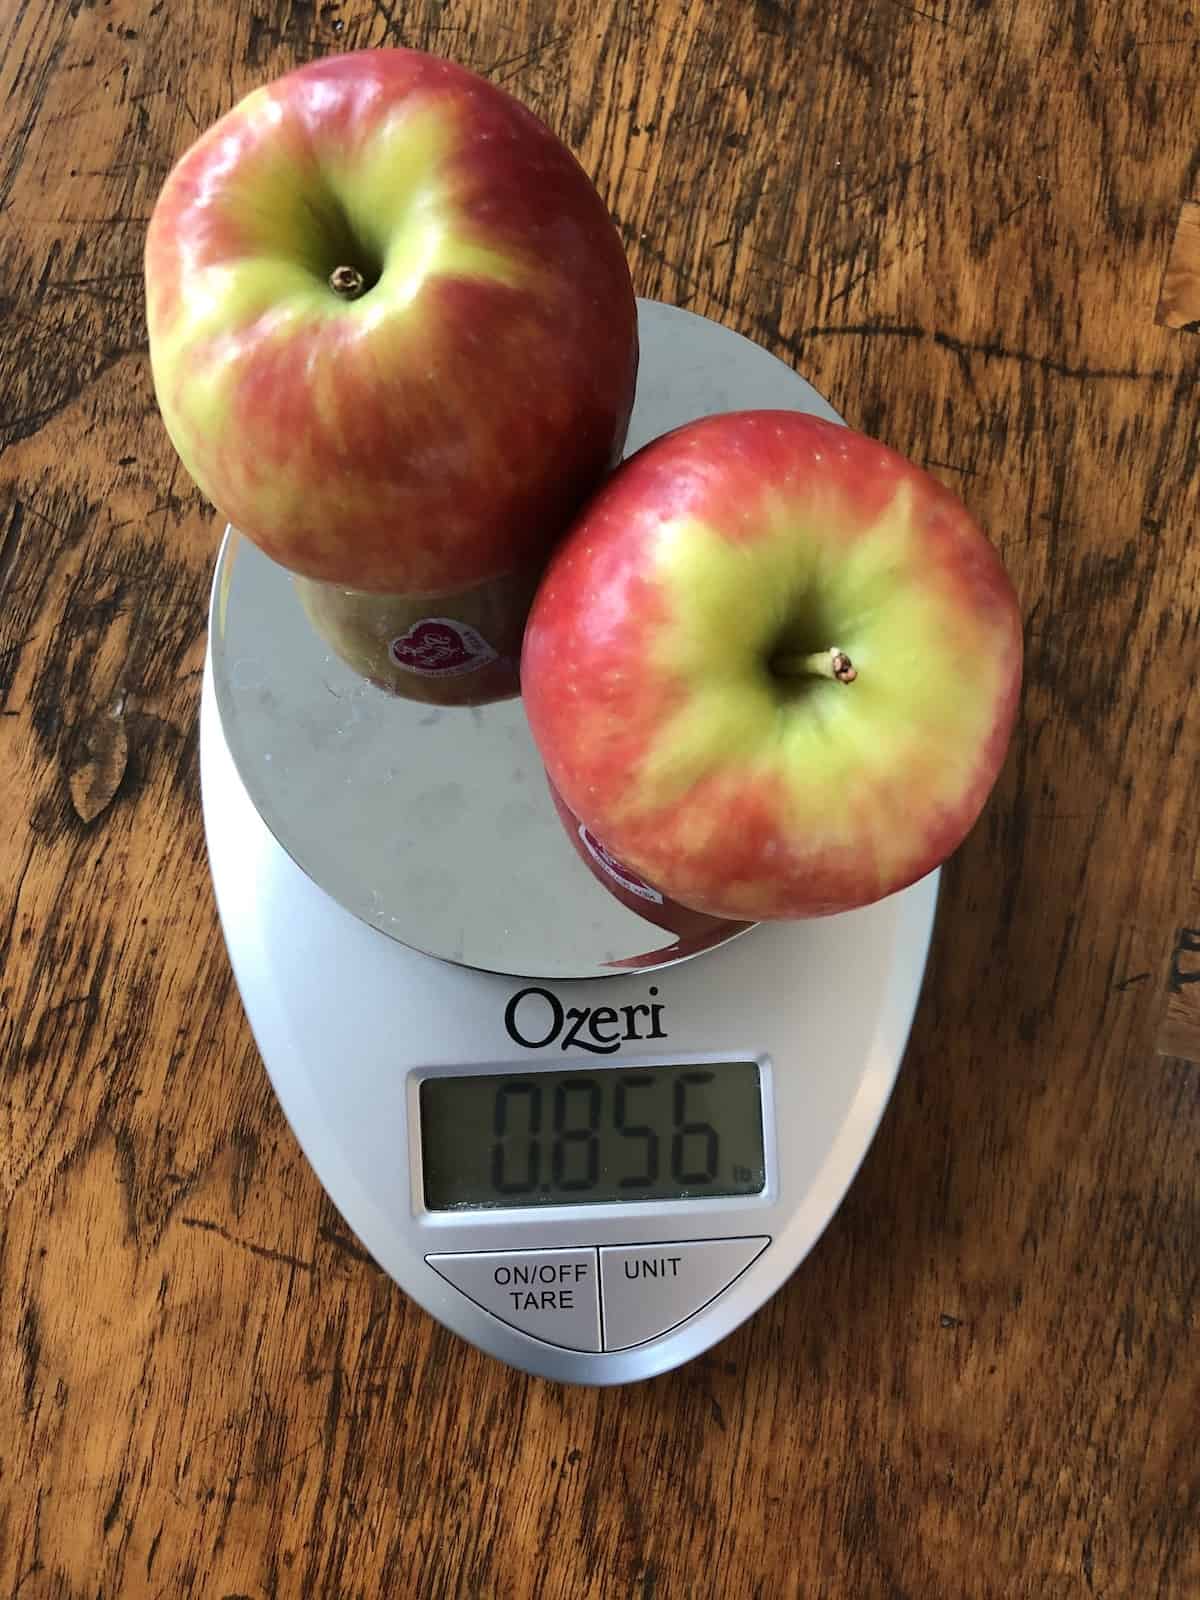 One pound of pink lady apples on a kitchen weigh scale